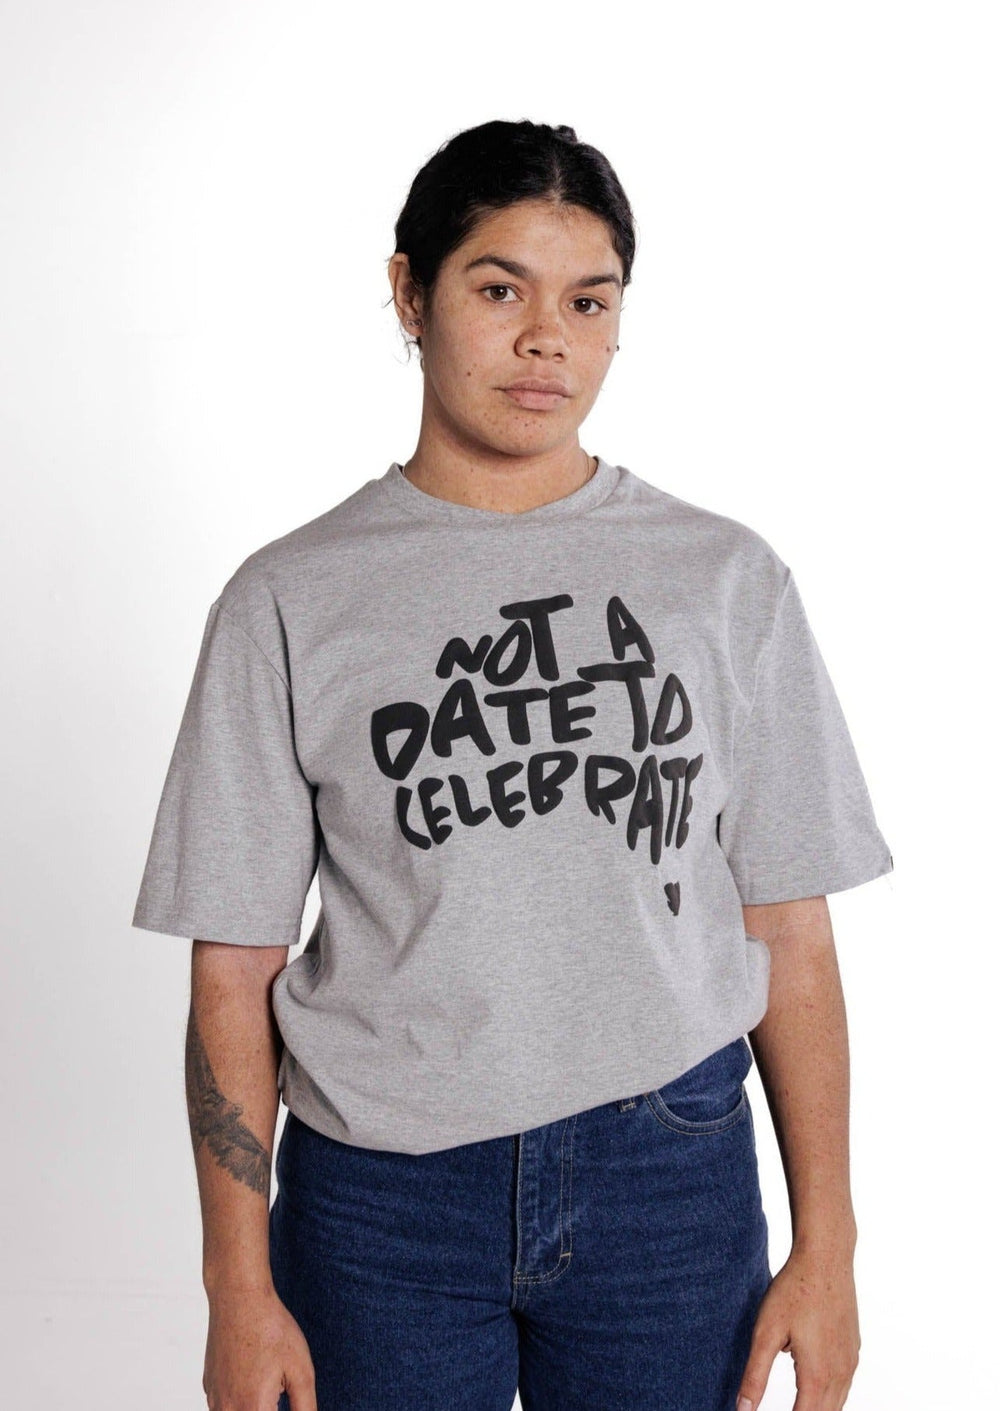 Clothing The Gaps. Not A Date To Celebrate Tee. Grey tee with screen printed 'Not A Date To Celebrate' black text in the shape of Australia big on the front chest of t-shirt.